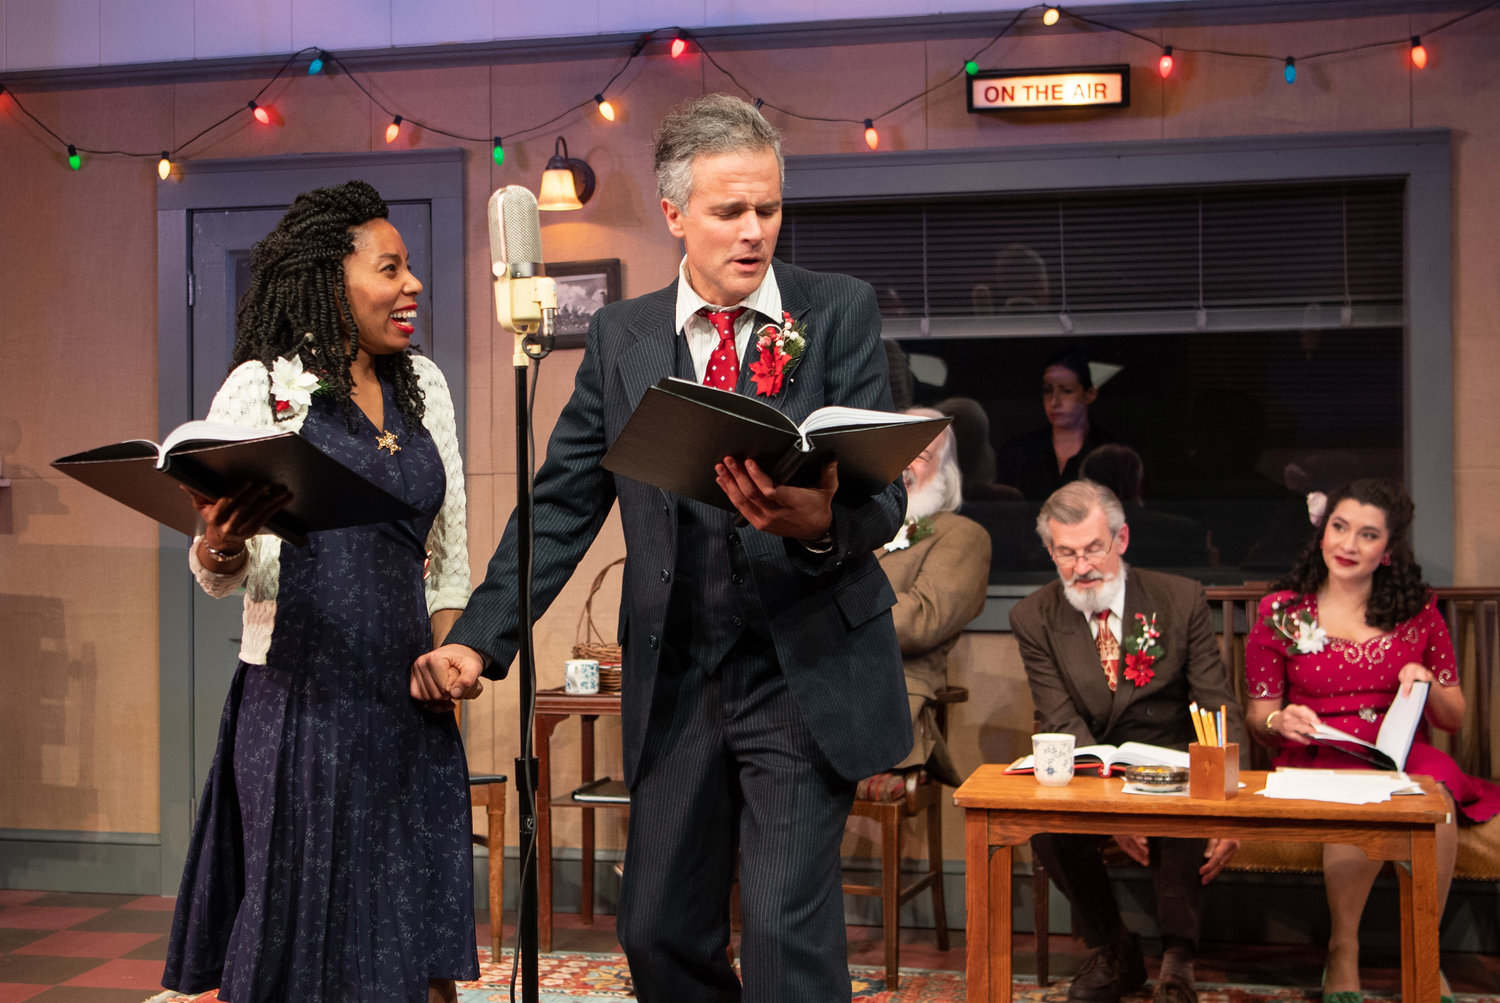 Artistic director Tony Estrella in The Gamm’s 2021 production of It’s A Wonderful Life: A Live Radio Play, which returns for the holidays for their 2022/23 season